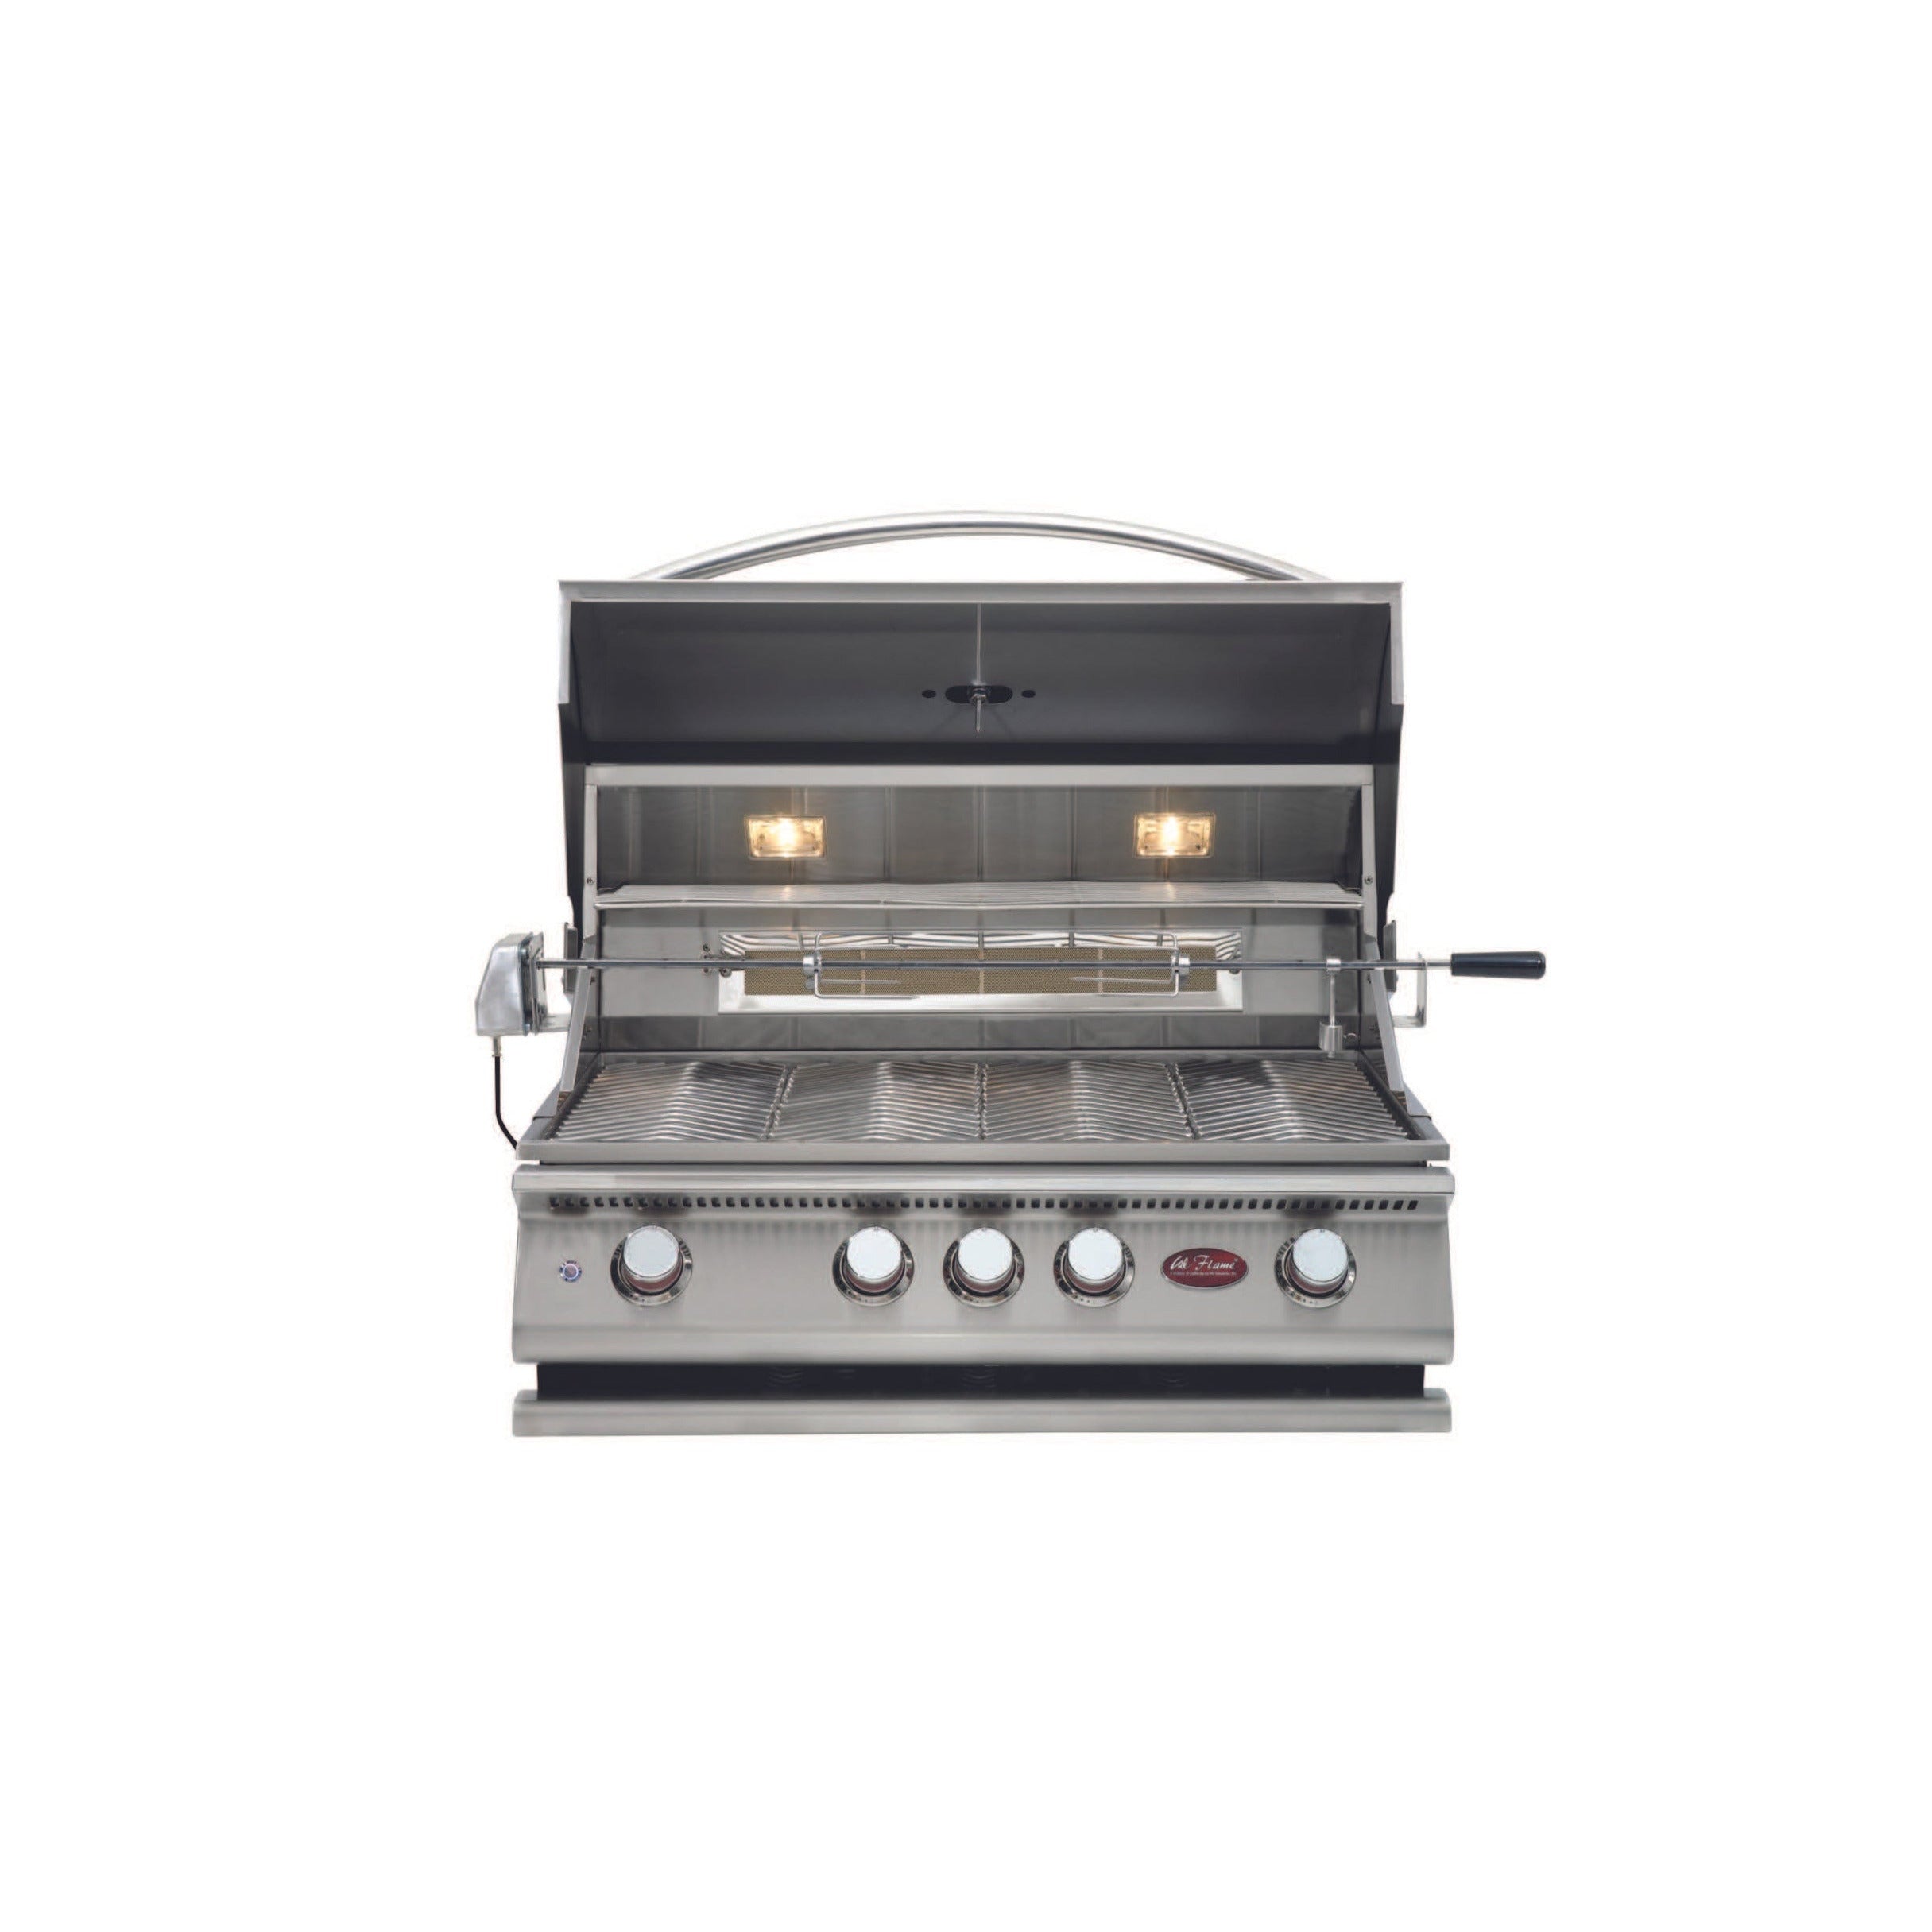 Cal Flame P Series P4 Grill